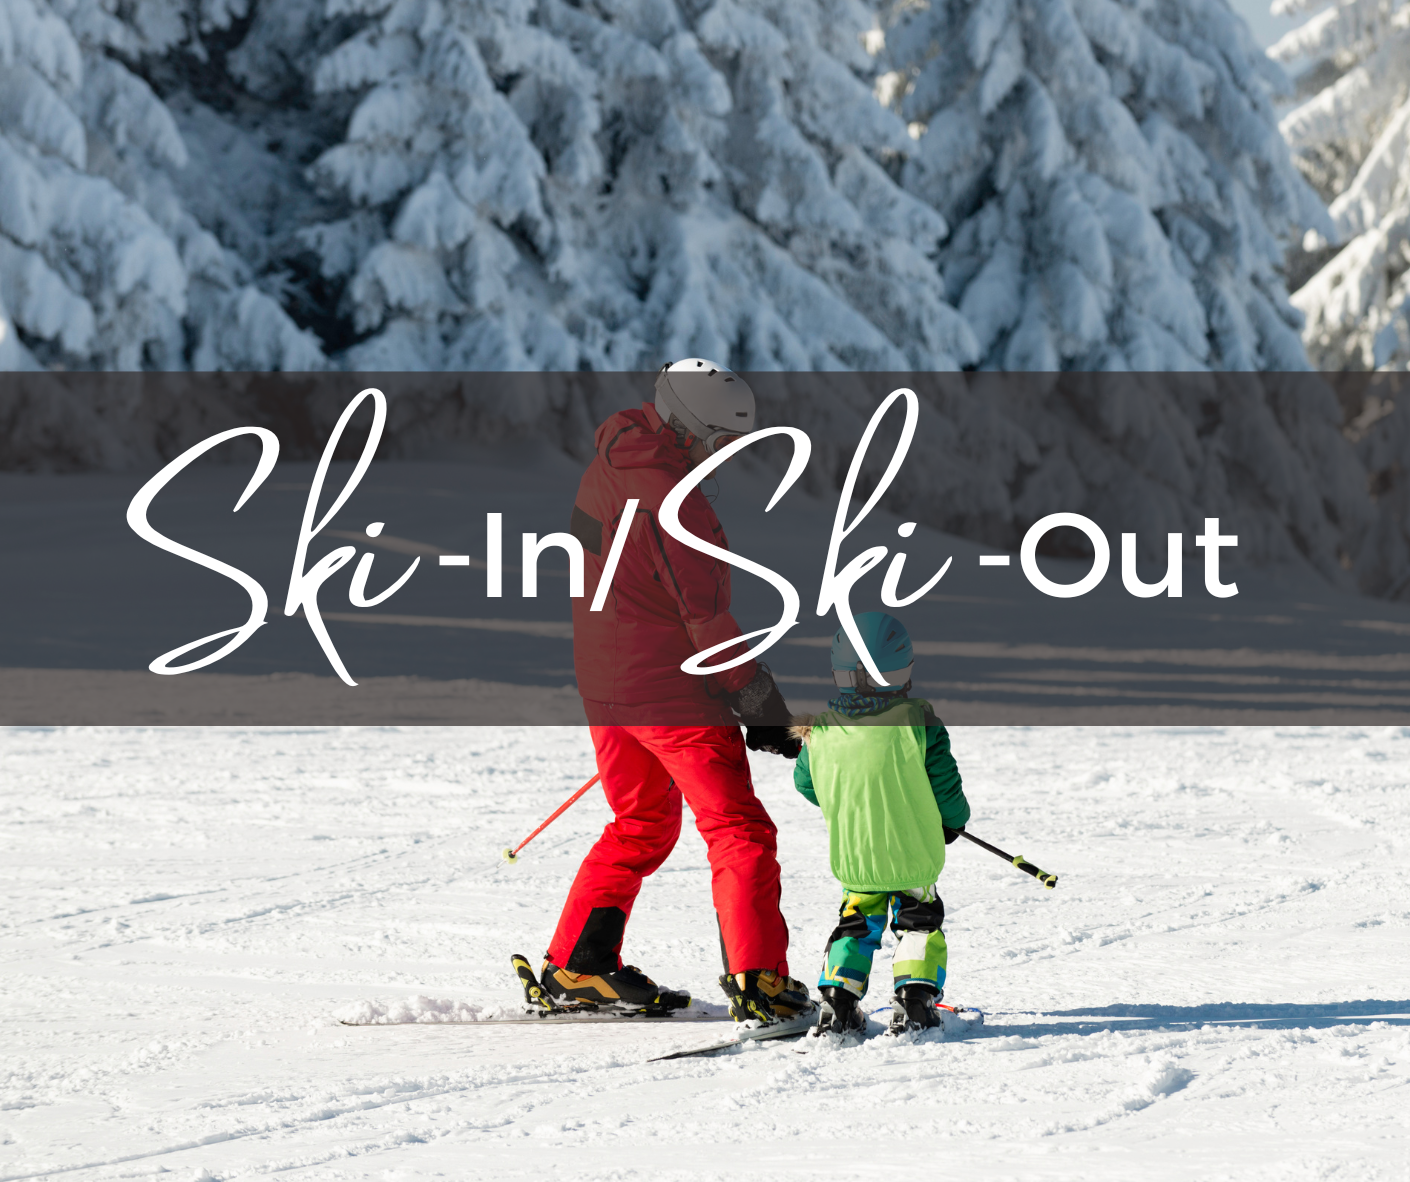 Adult and Child Skiing with Text Overlay Sk-in/ski-out